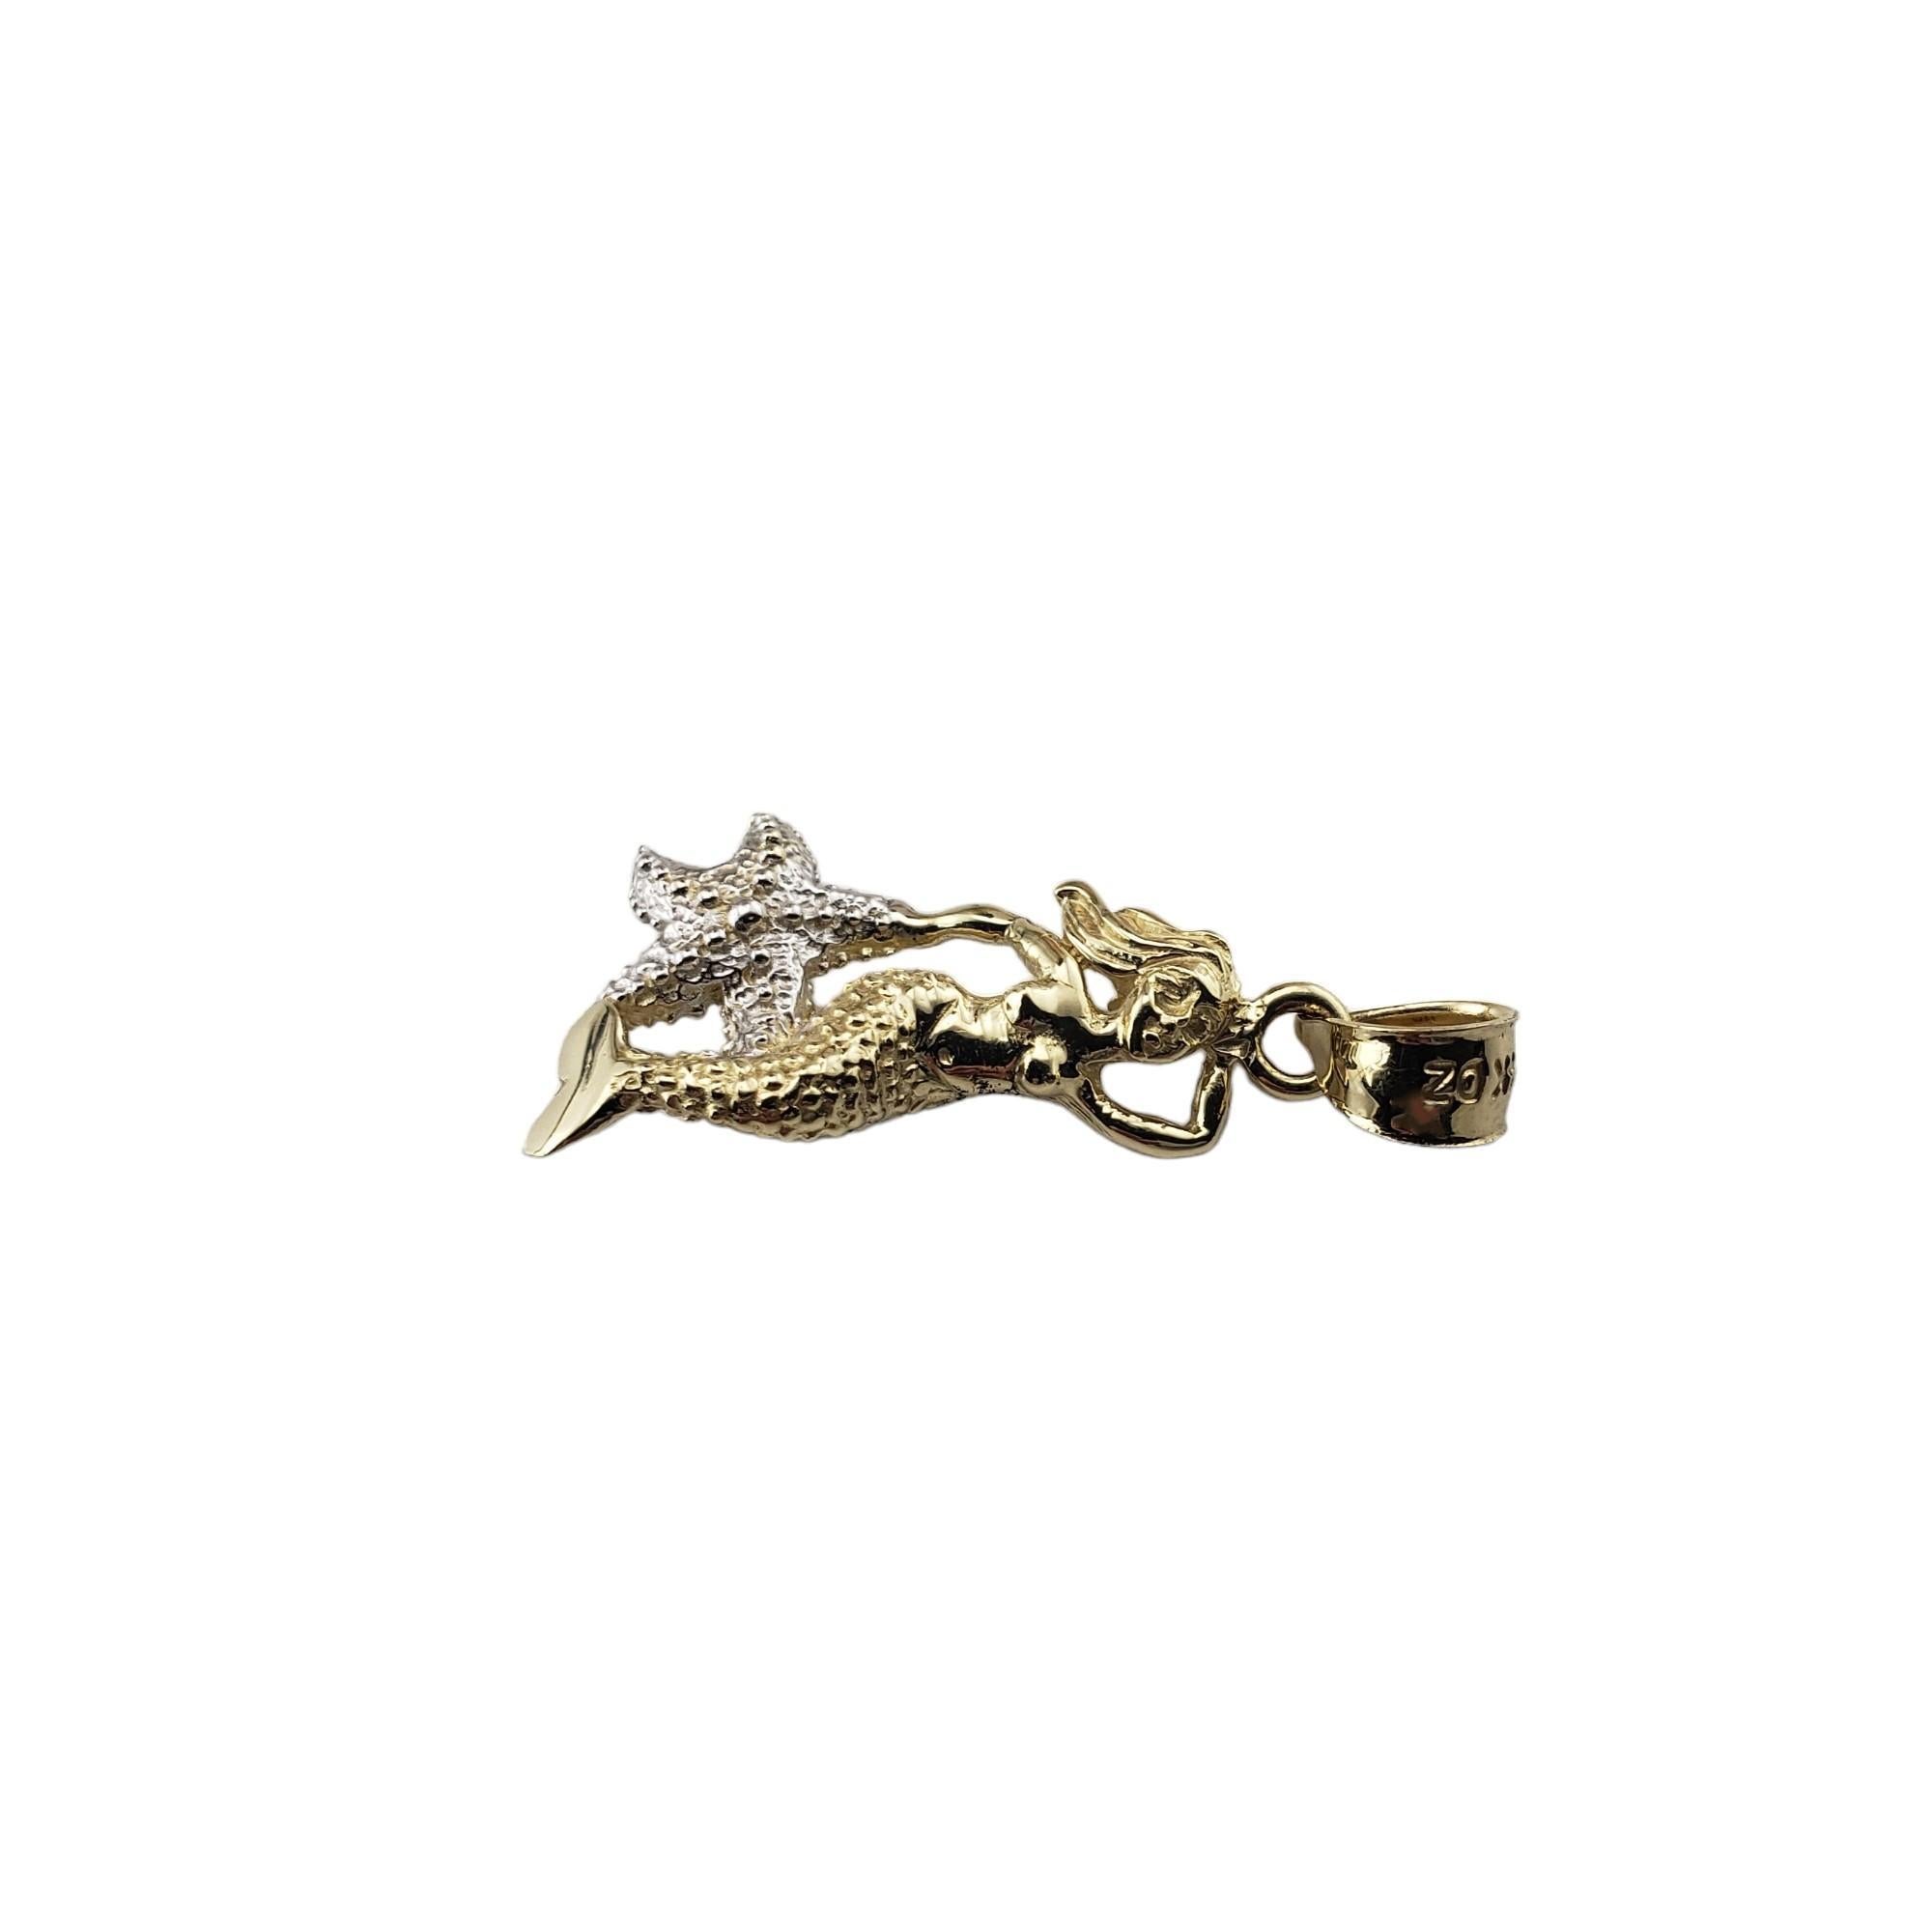 Vintage 14K Yellow and White Gold Mermaid Charm-

This lovely charm features a beautiful mermaid holding a starfish crafted in beautifully detailed 14K yellow and white gold.

Size: 23 mm x 12 mm

Stamped: 14K

Weight: 2.7 gr./ 1.7 dwt.

Very good